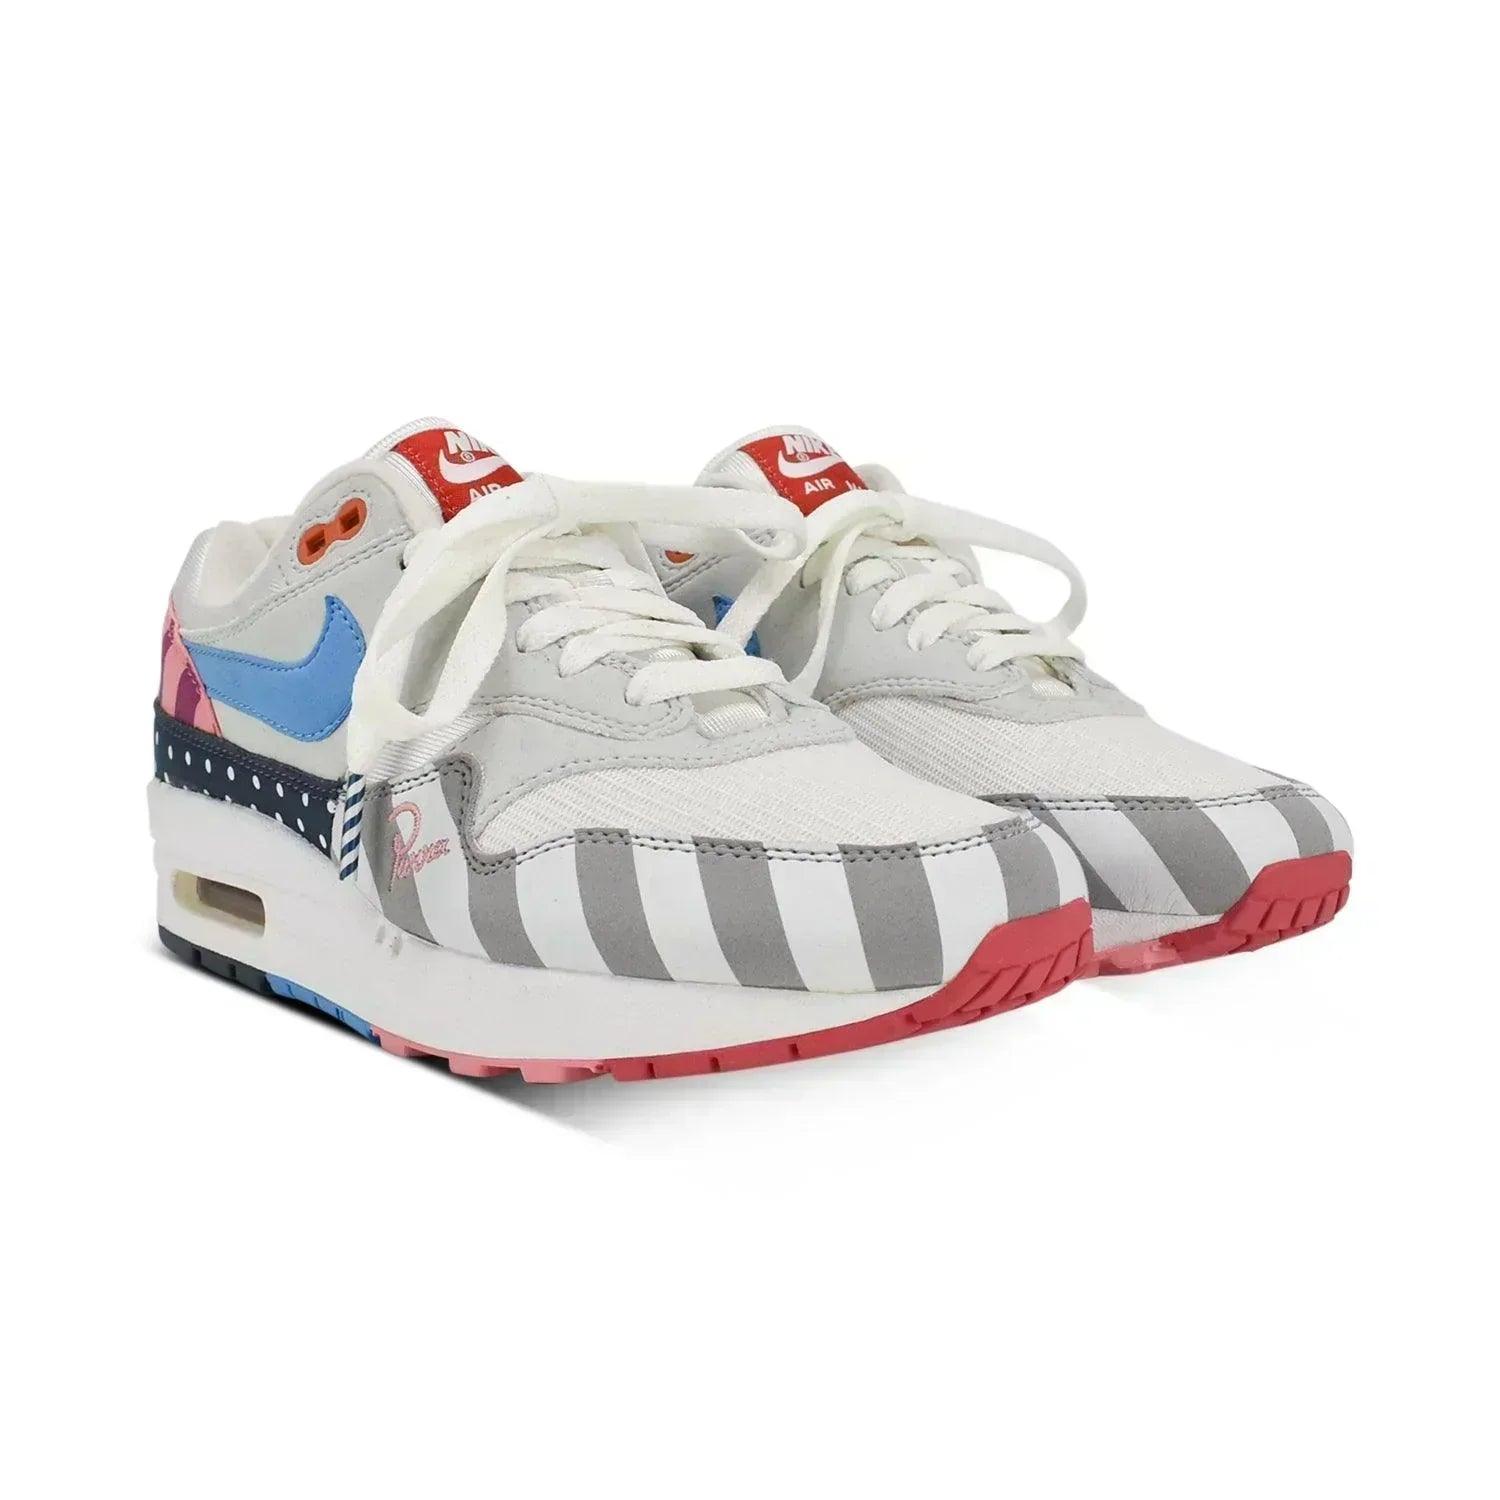 Nike 'Air Max 1 Parra' Sneakers - Men's 5.5/Women's 7 - Fashionably Yours